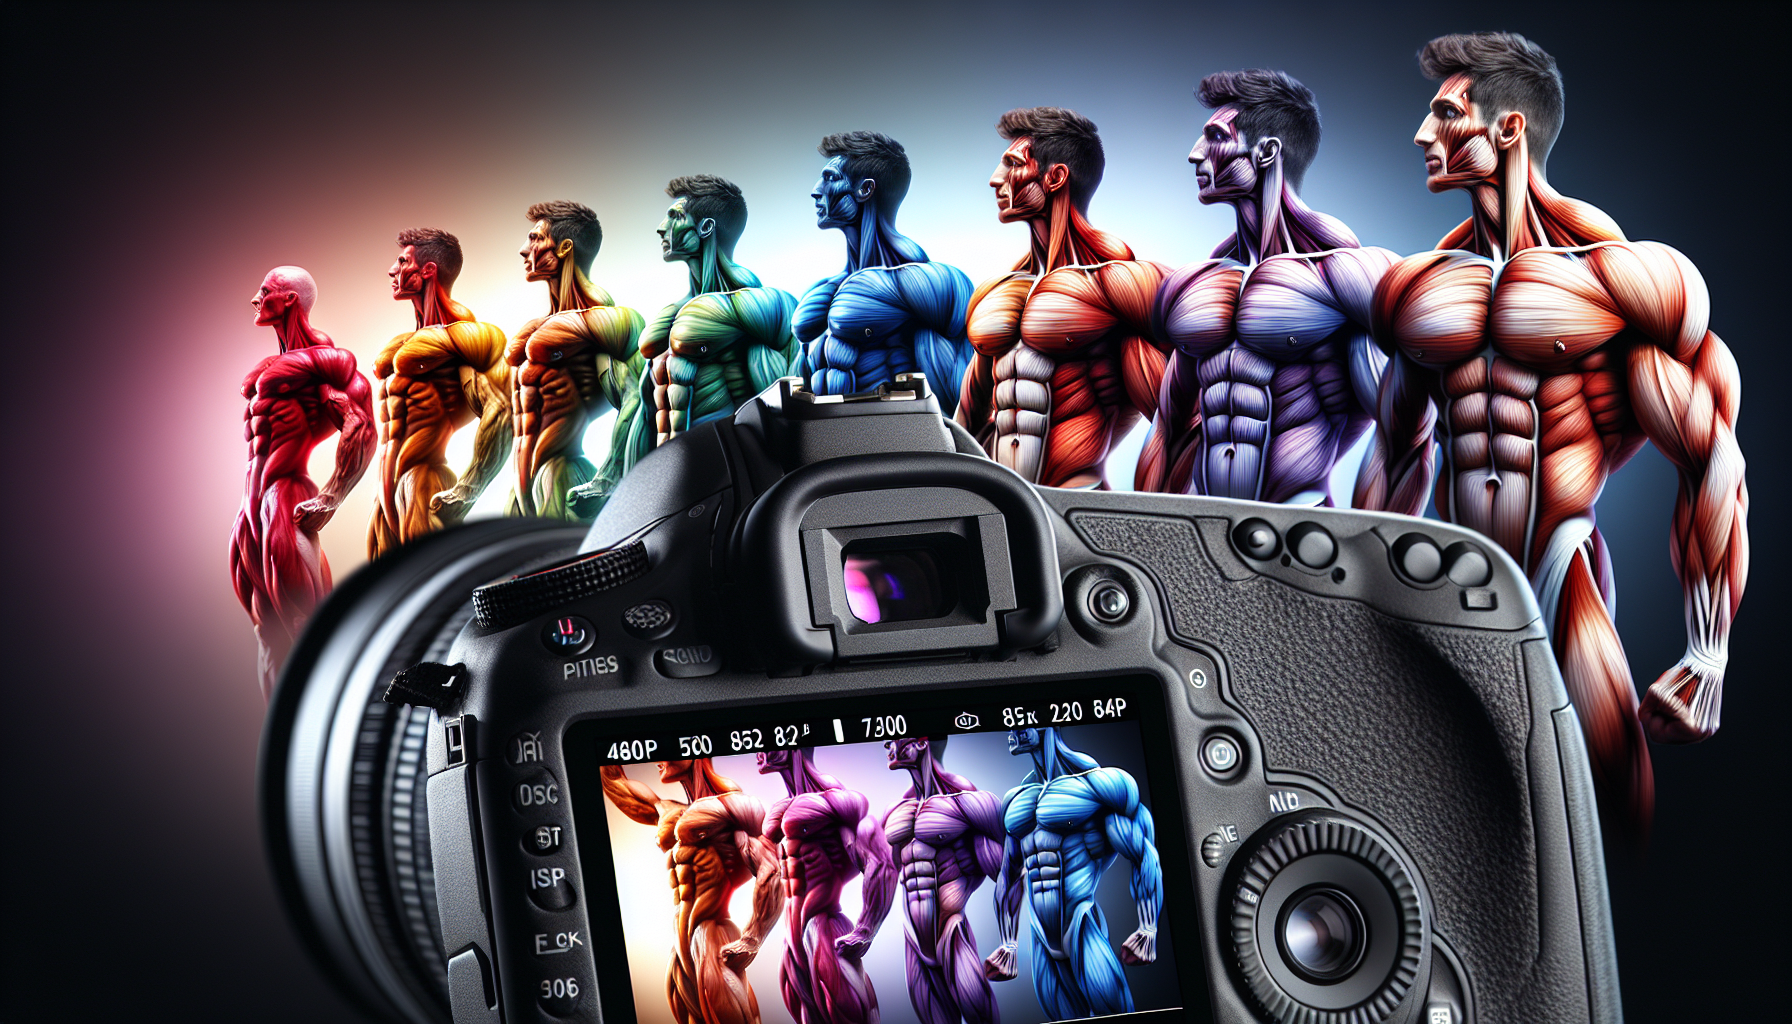 create an image that visualizes the evolution of bodybuilding